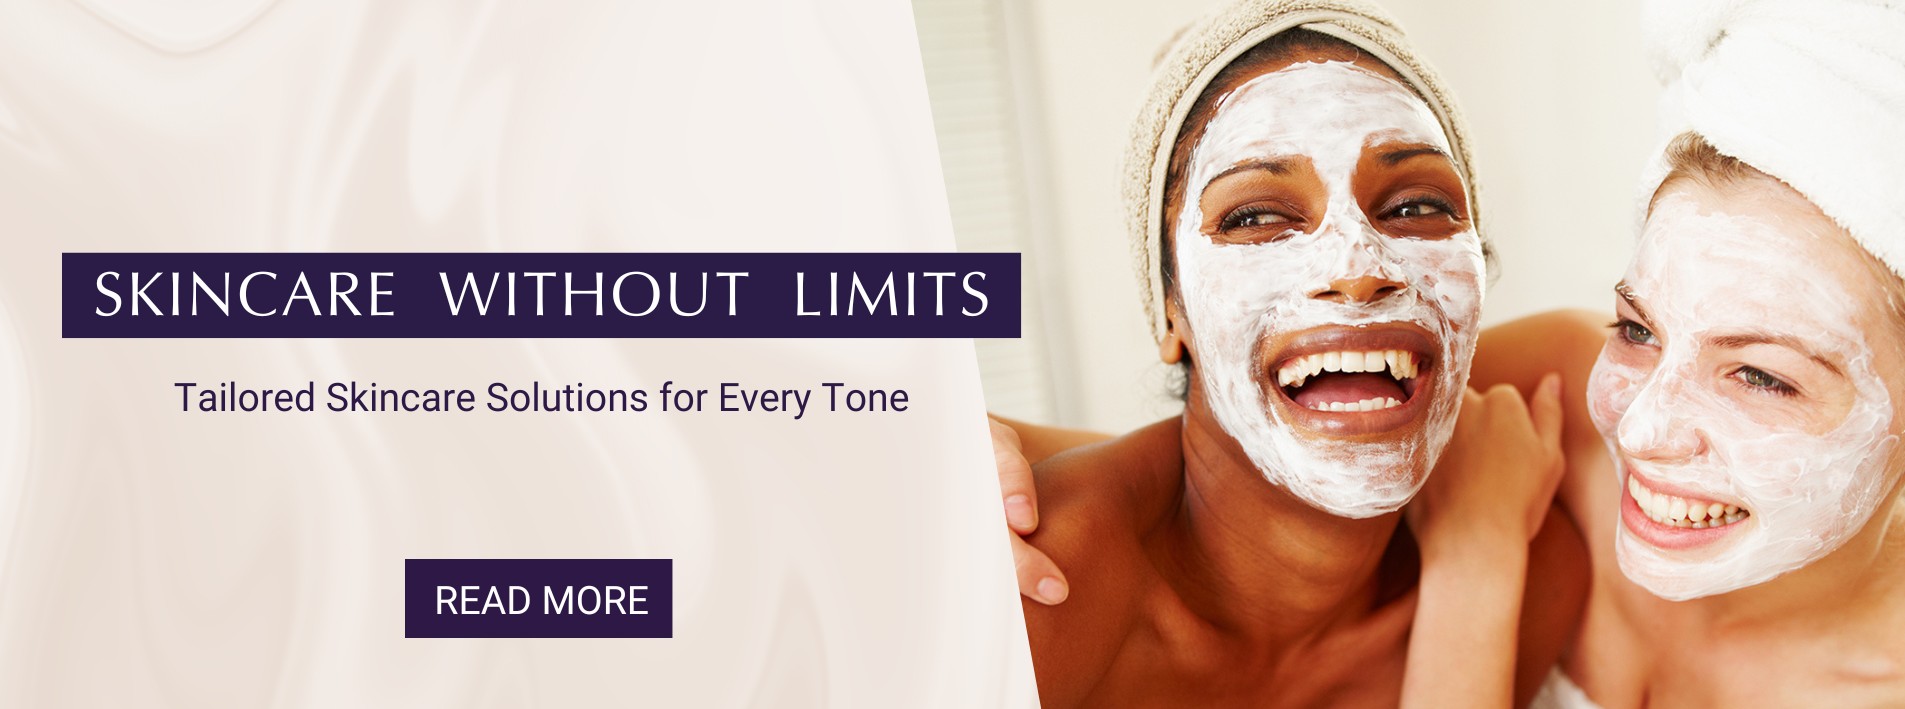 Skincare without Limits: Skincare For Every Tone